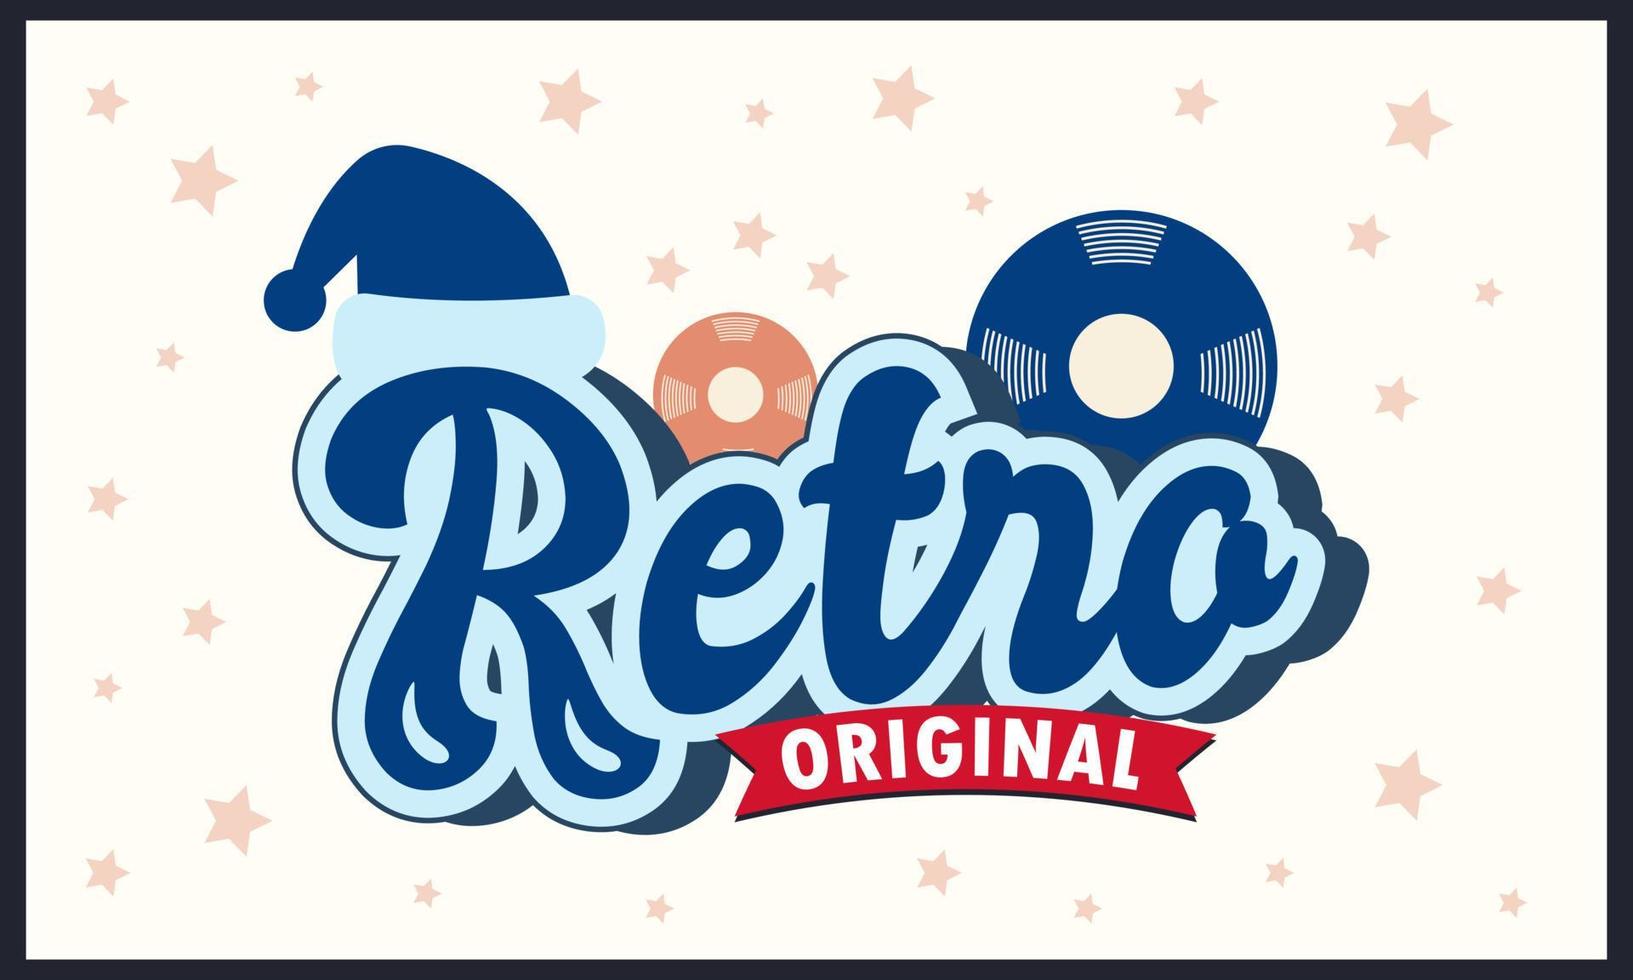 Retro radio, vintage texteditable 70s and 80s, Retro and classic text style vector